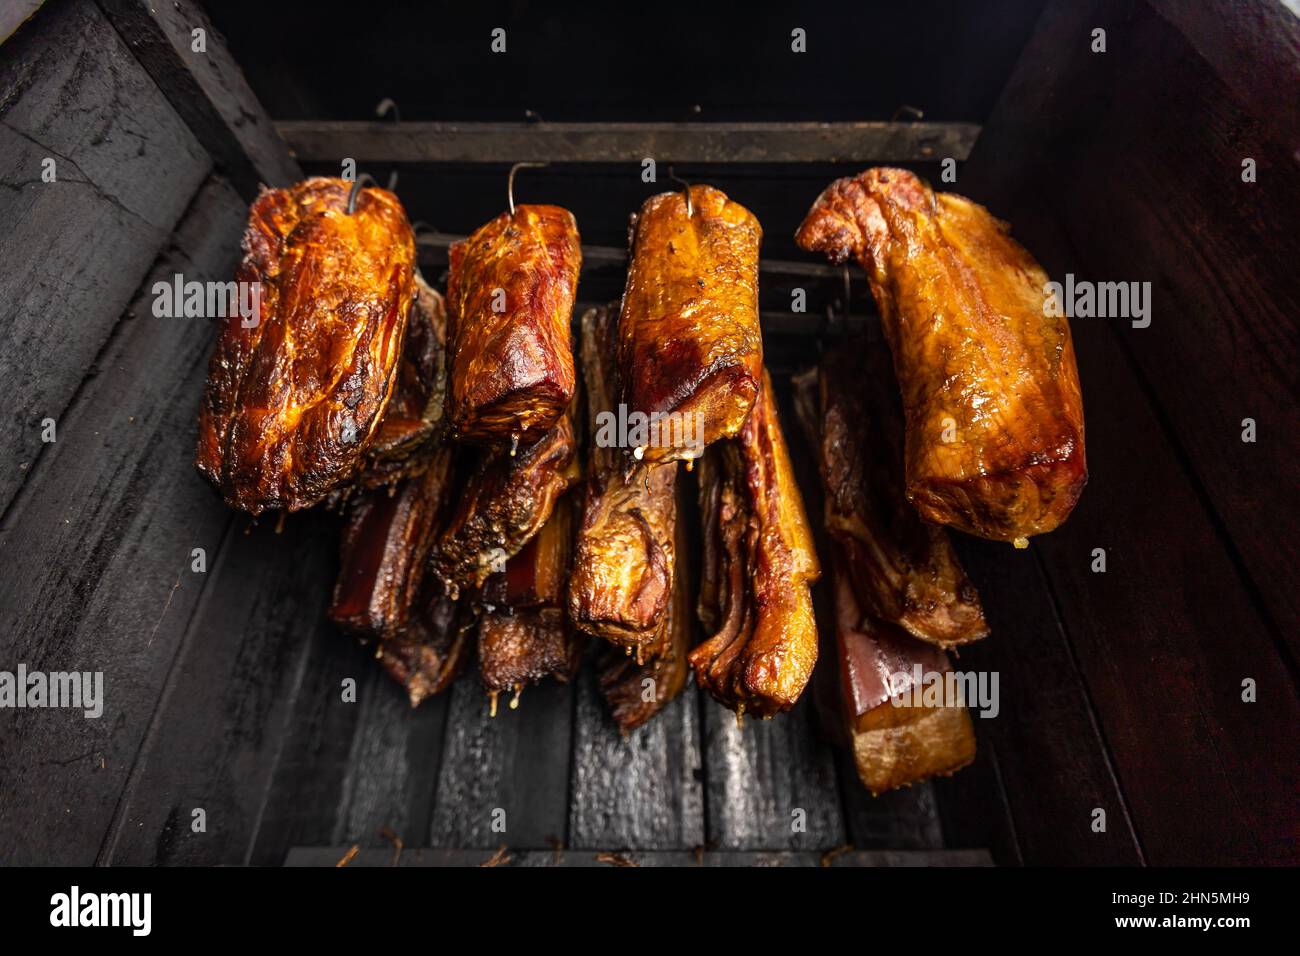 Traditionally smoked meats in a smokehouse, food concept Stock Photo